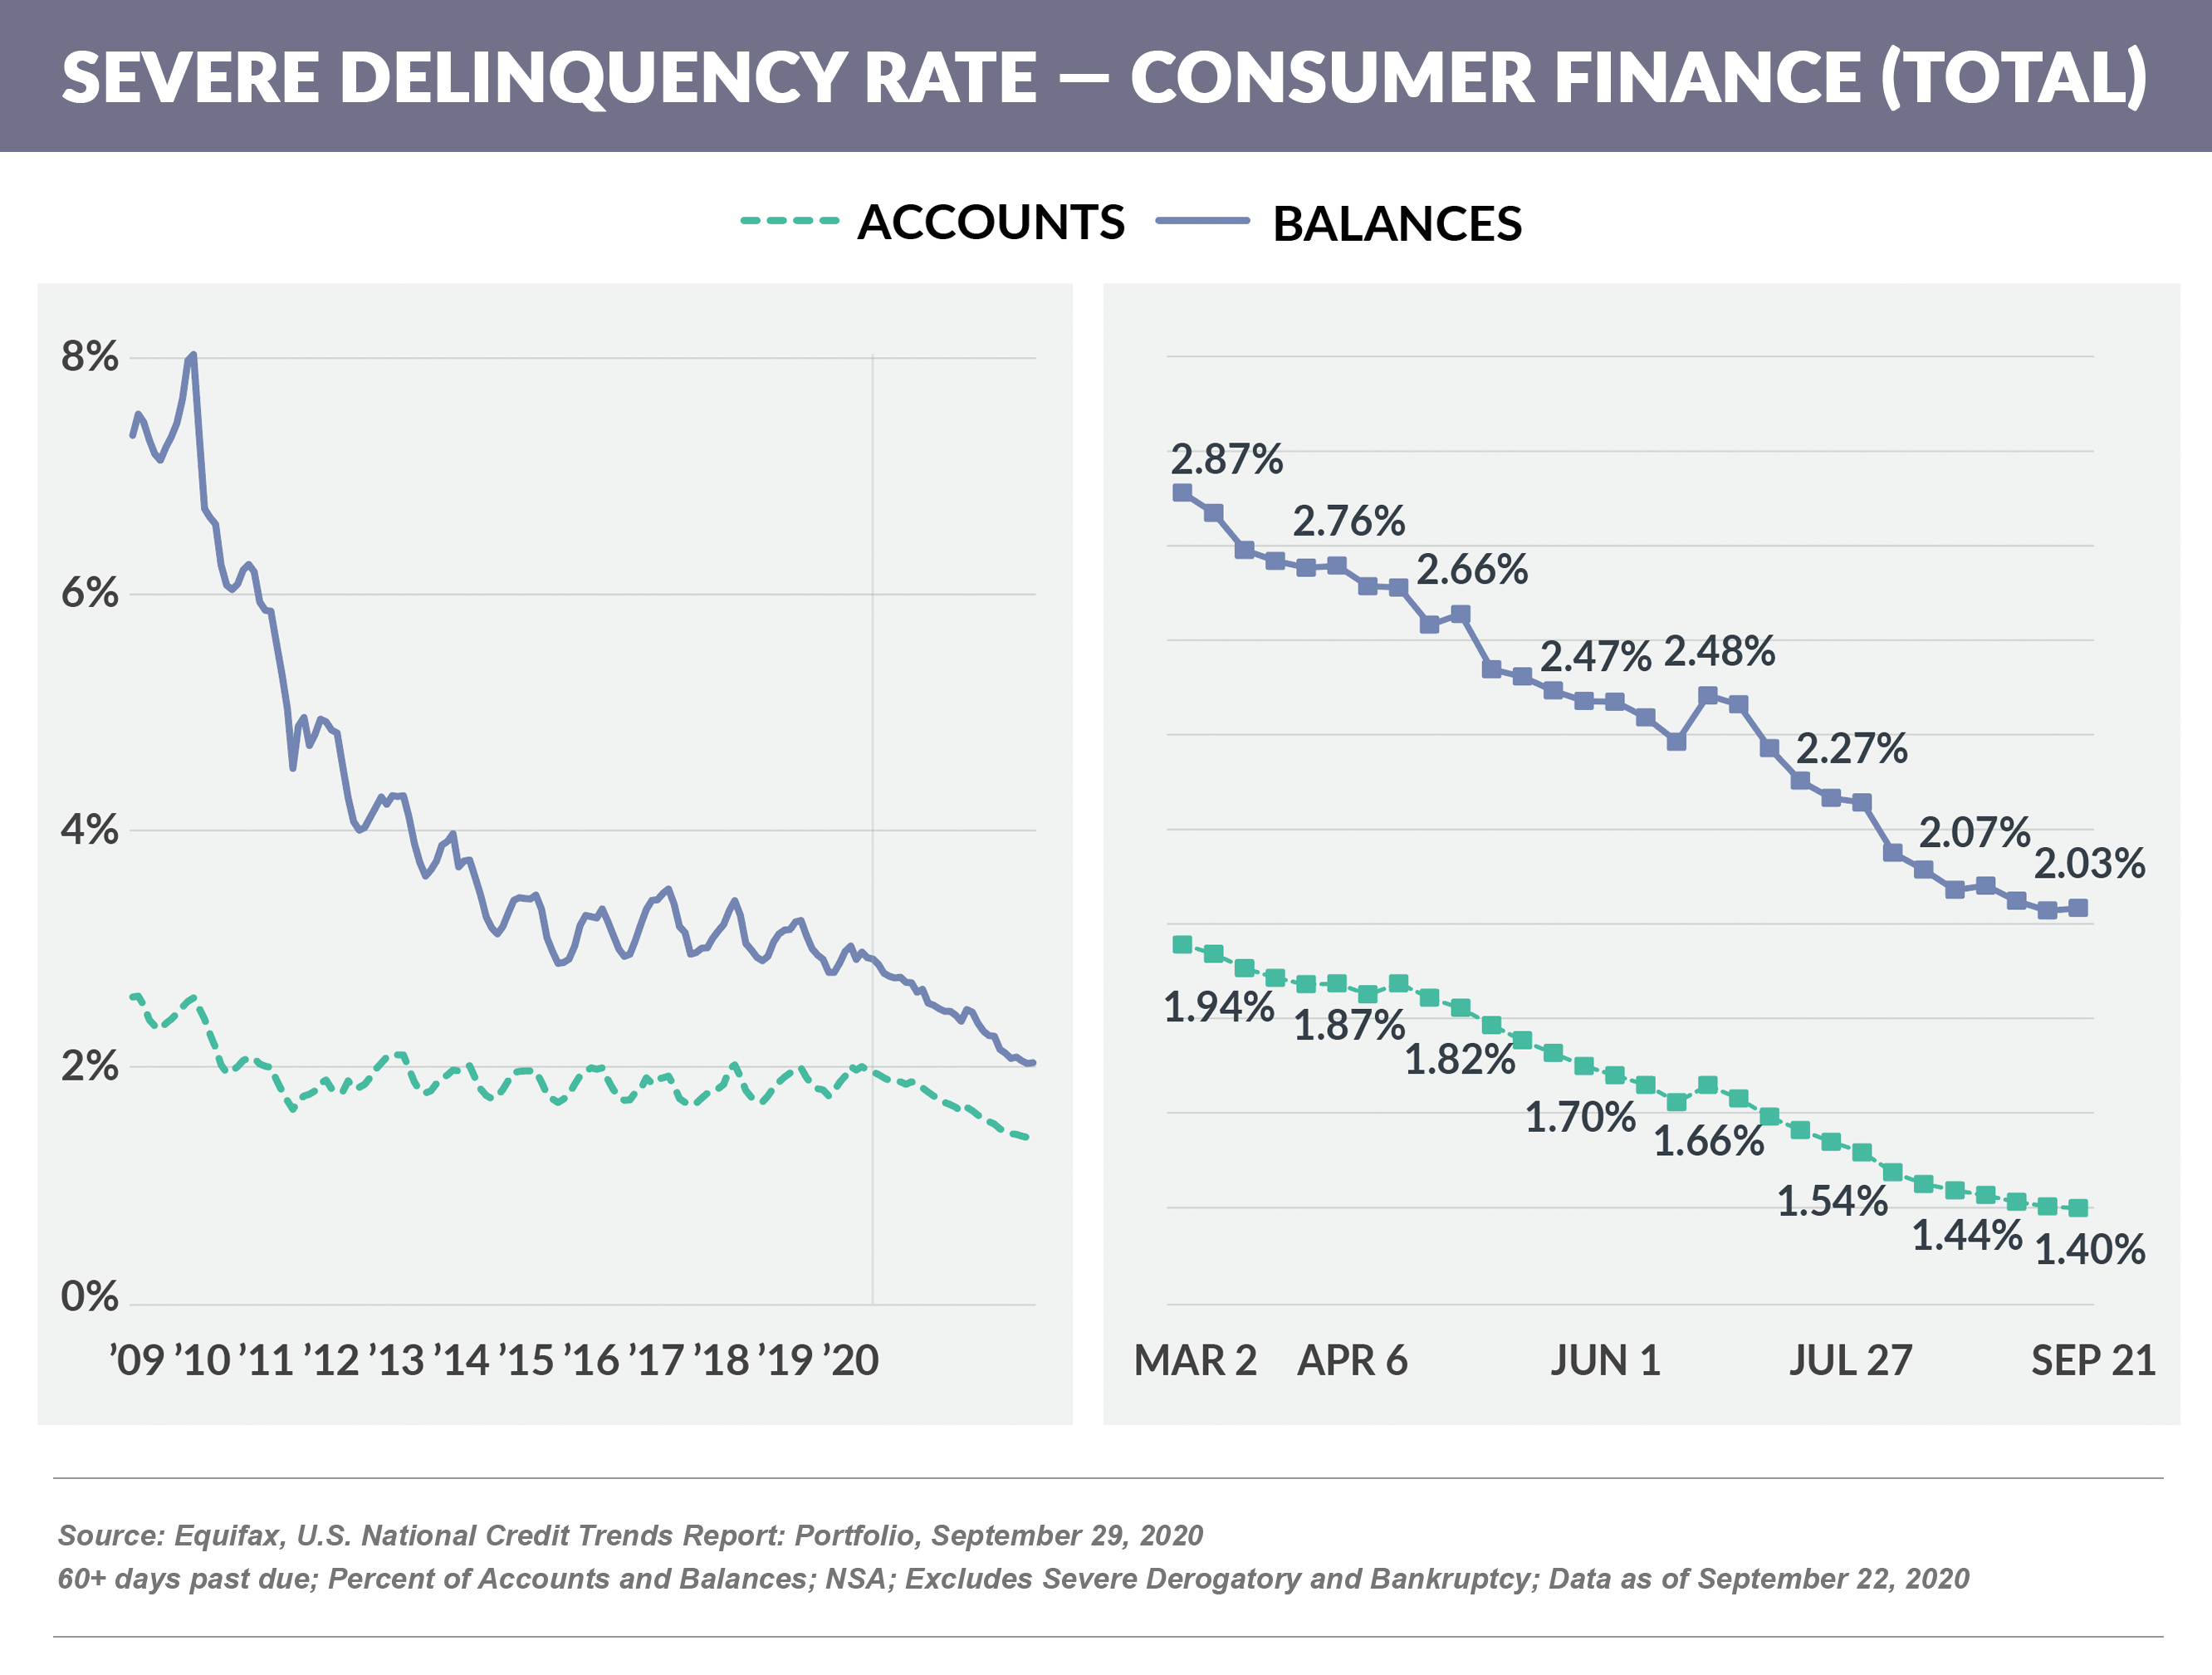 SEVERE DELINQUENCY RATE — consumer finance 20201010